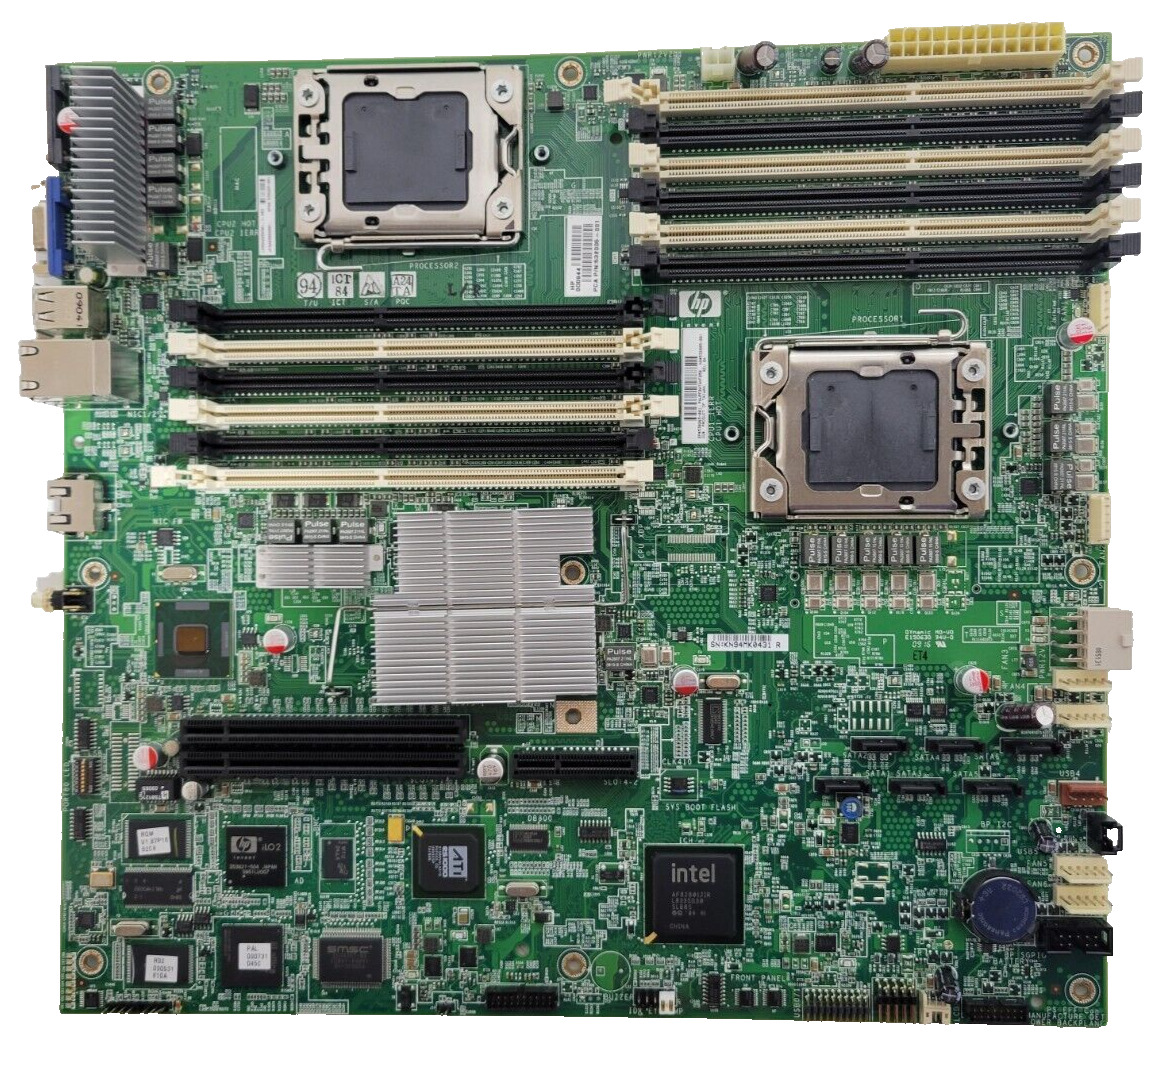 HP MOTHERBOARD FOR HP PROLIANT SE316M1 - SYSTEM BOARD 538265-001 - NEW